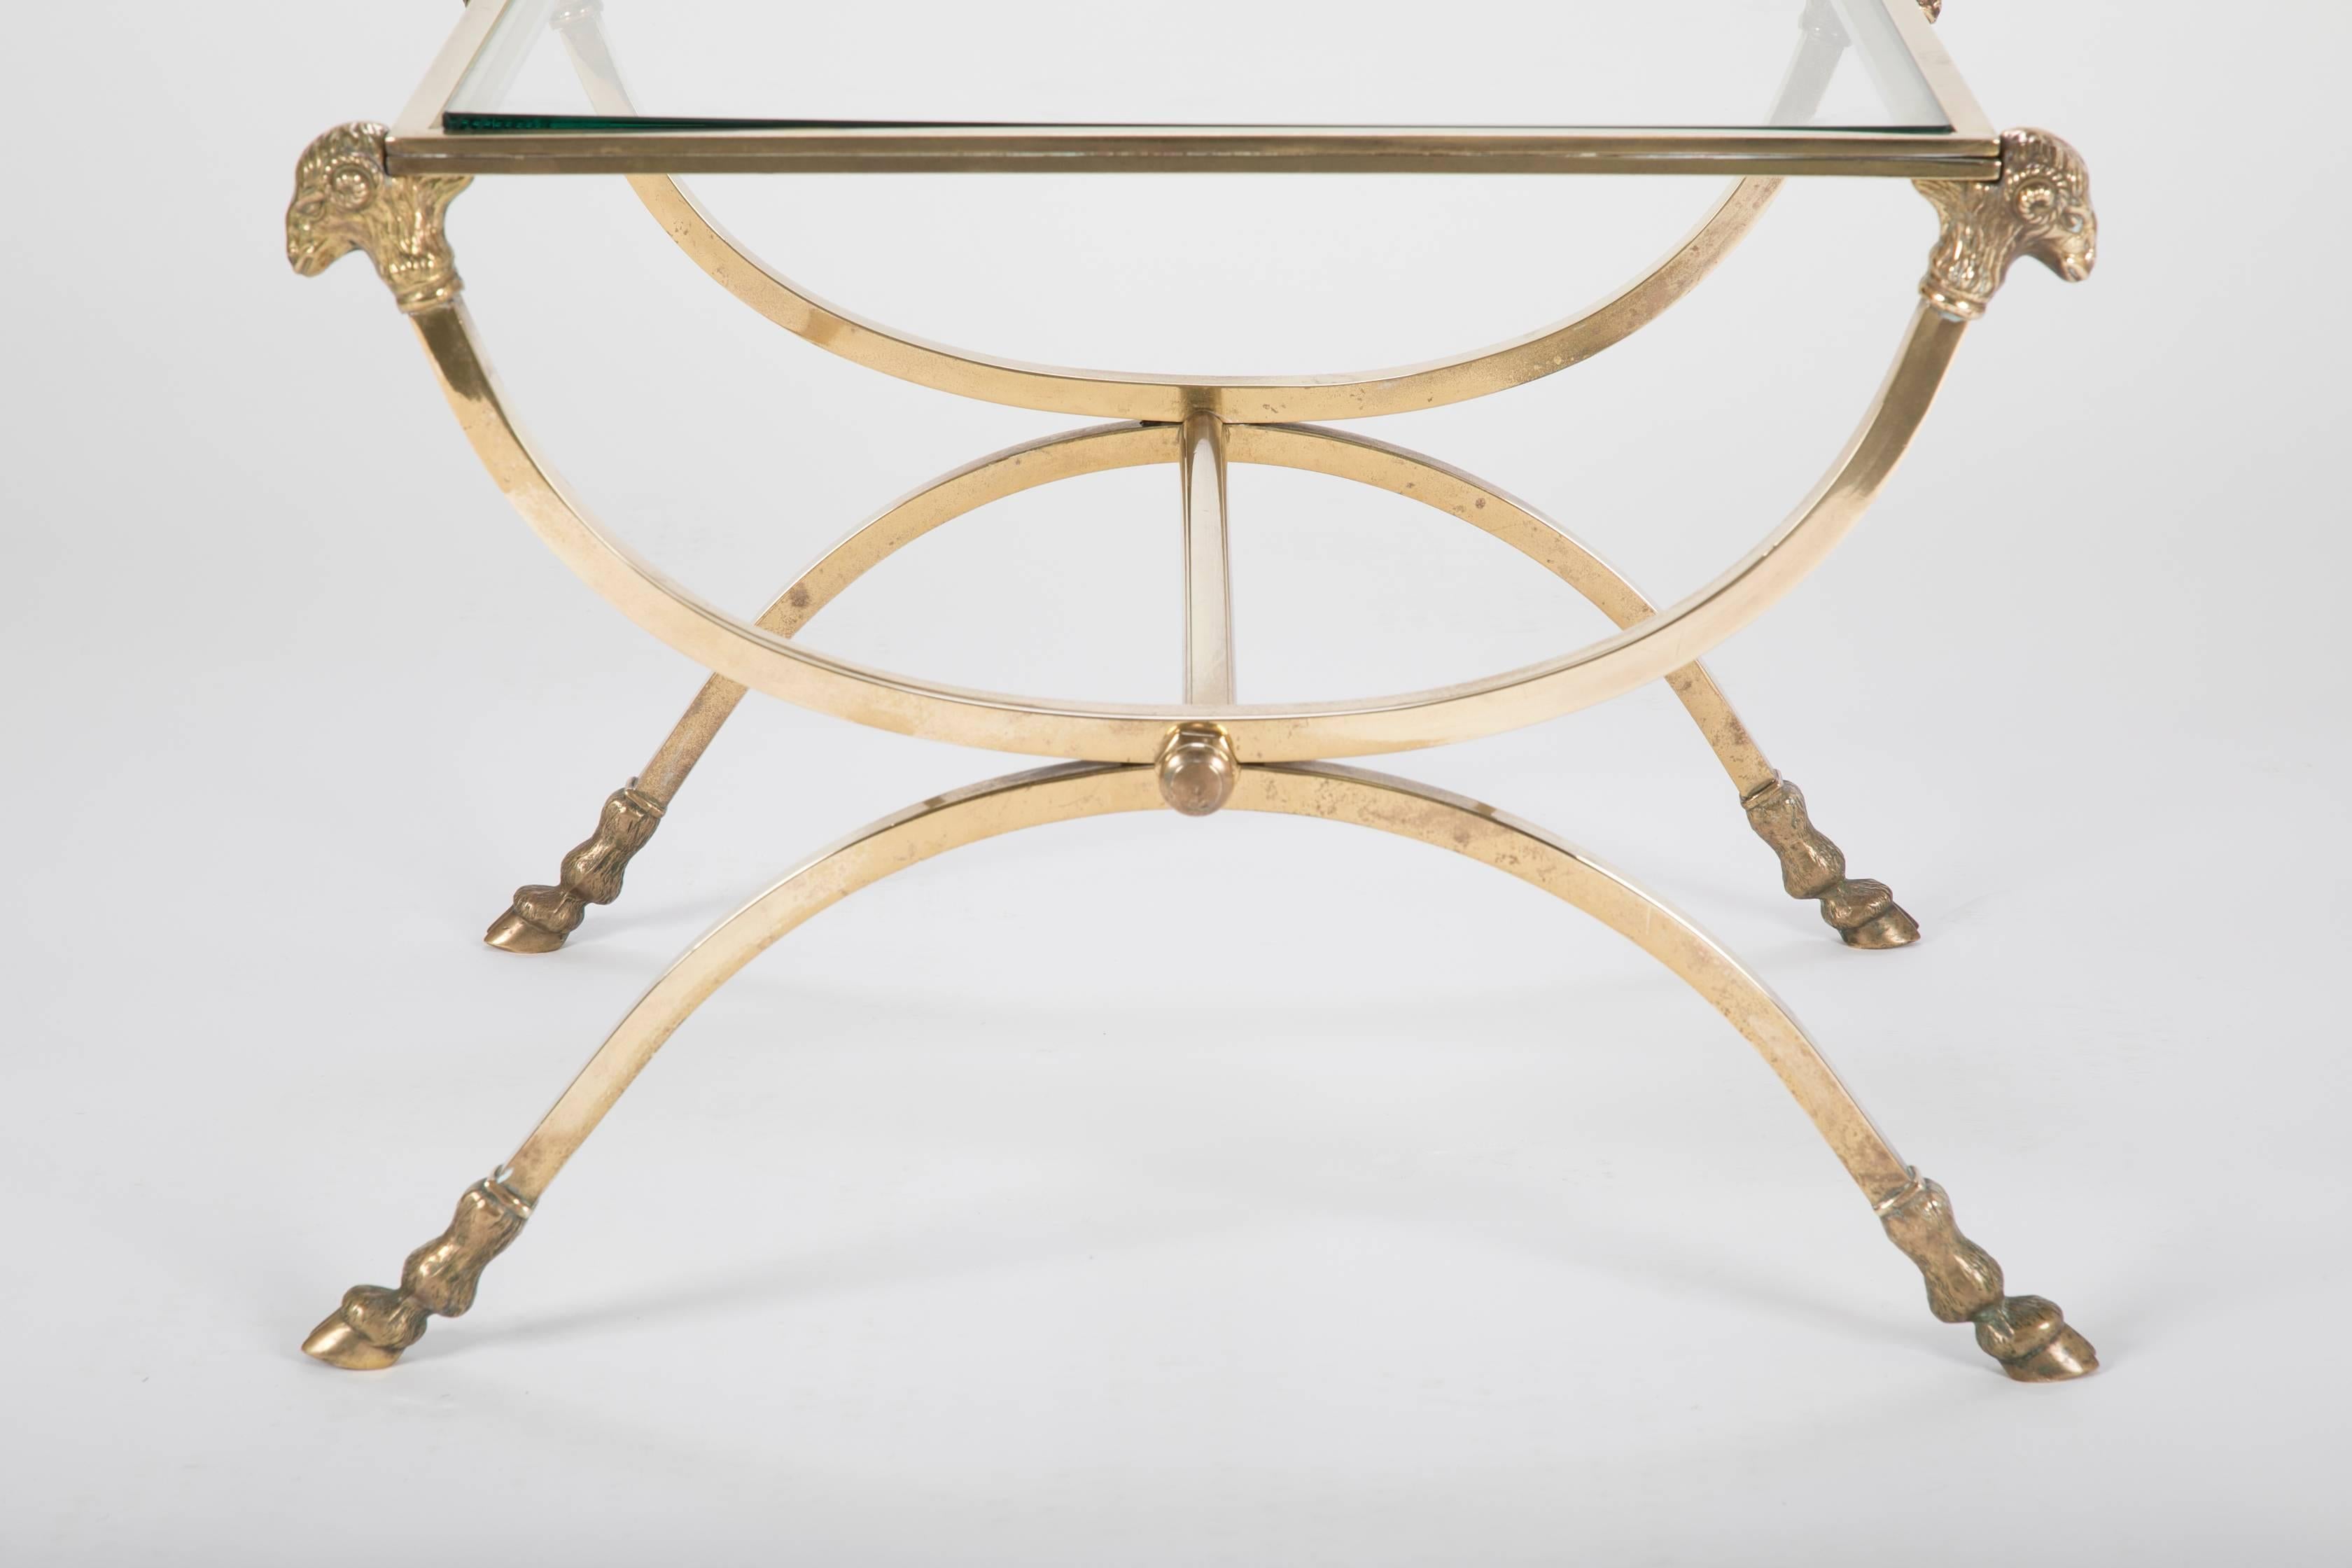 Italian Mid-Century Glass Topped Bronze Side Table with Rams Heads and Hoof Feet For Sale 1